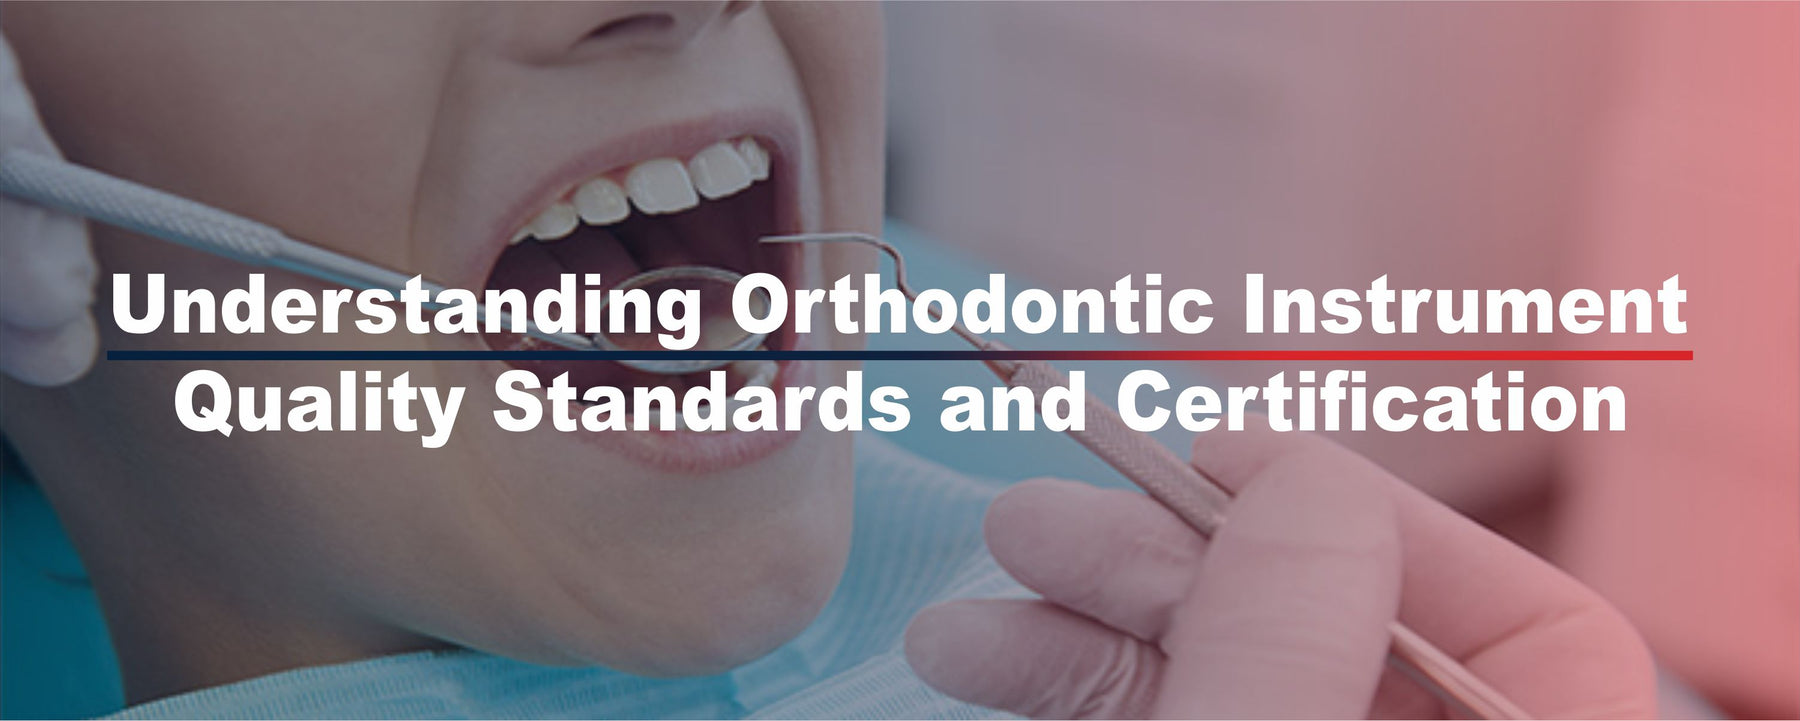 Understanding Orthodontic Instrument Quality Standards and Certification